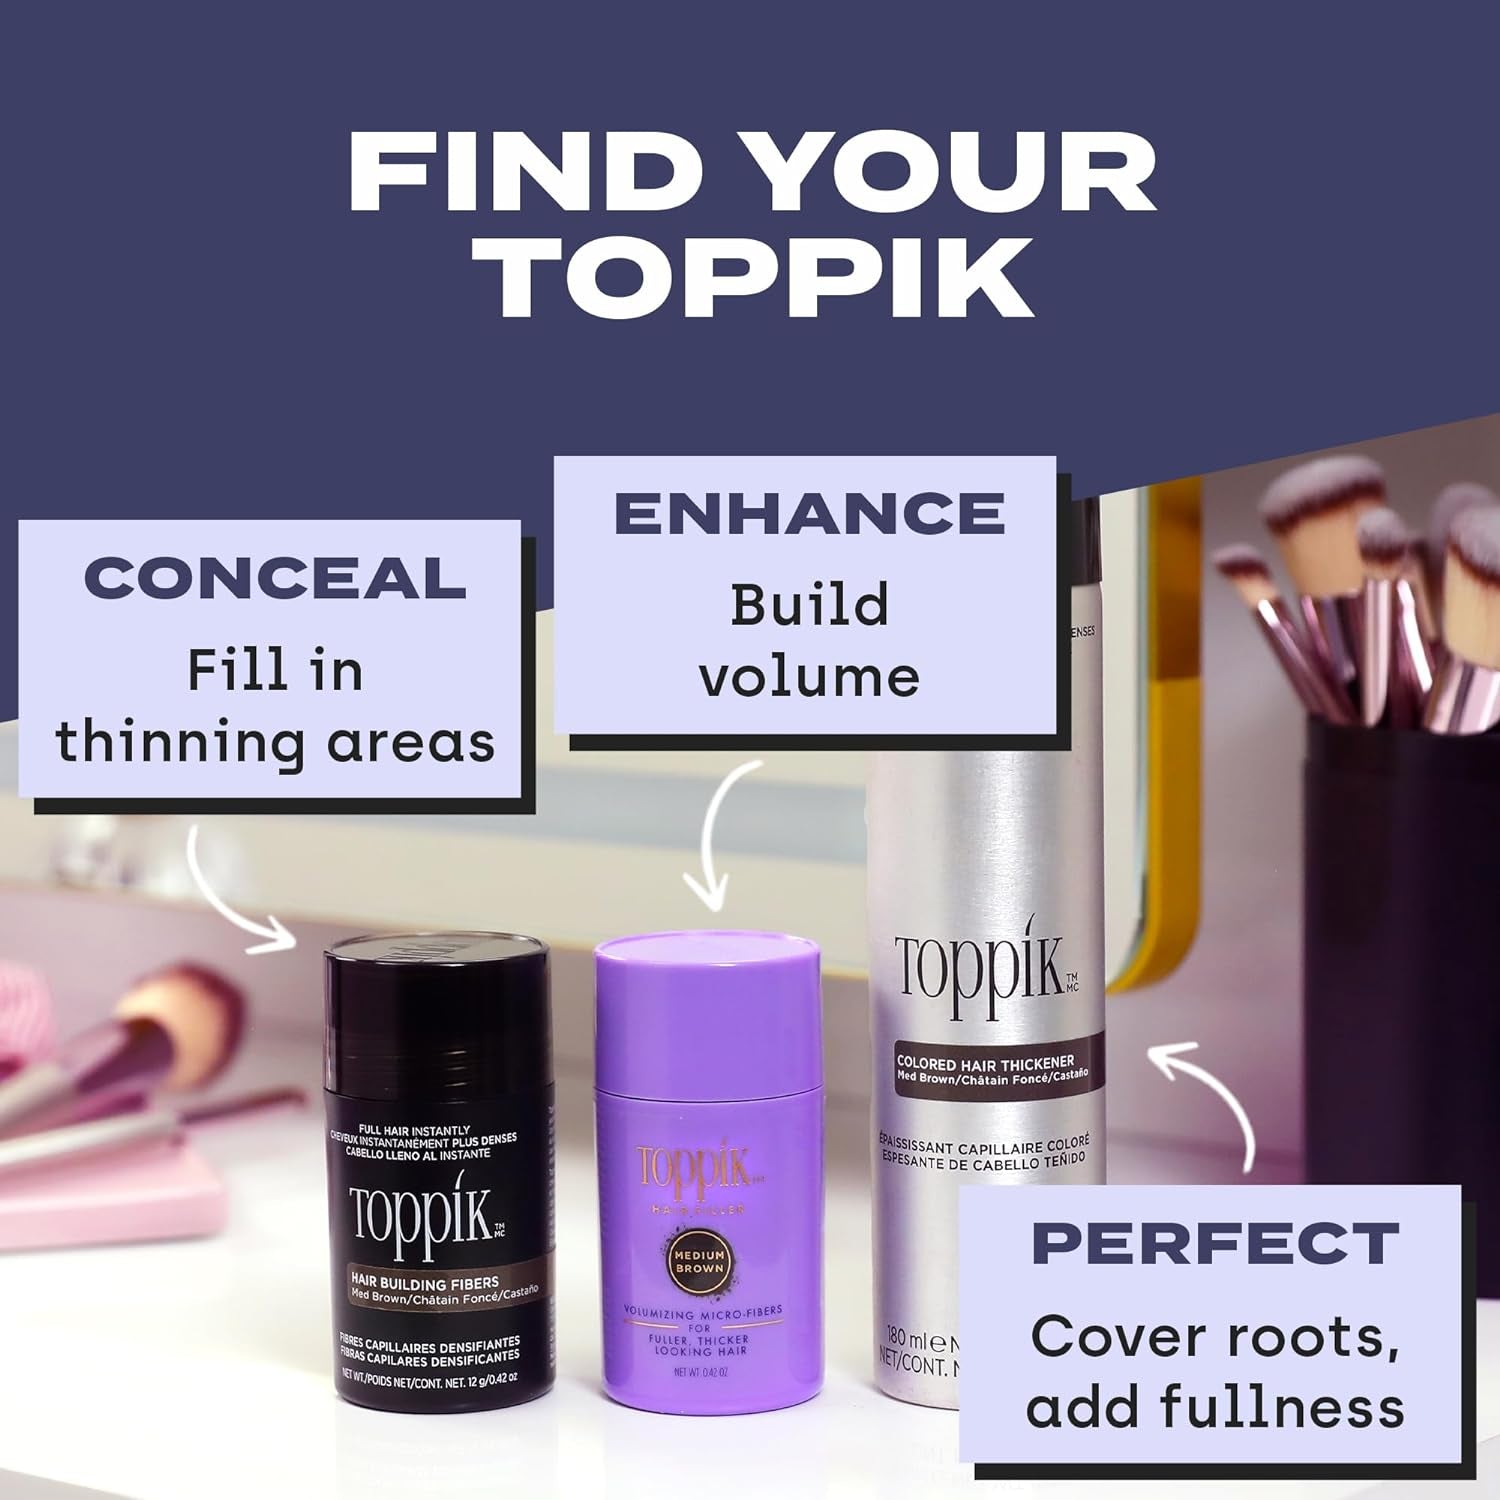 Toppik Colored Hair Thickener, Temporary Hair Color Spray for Root Touchup with Hair Thickening Fibers, 5.1 Oz